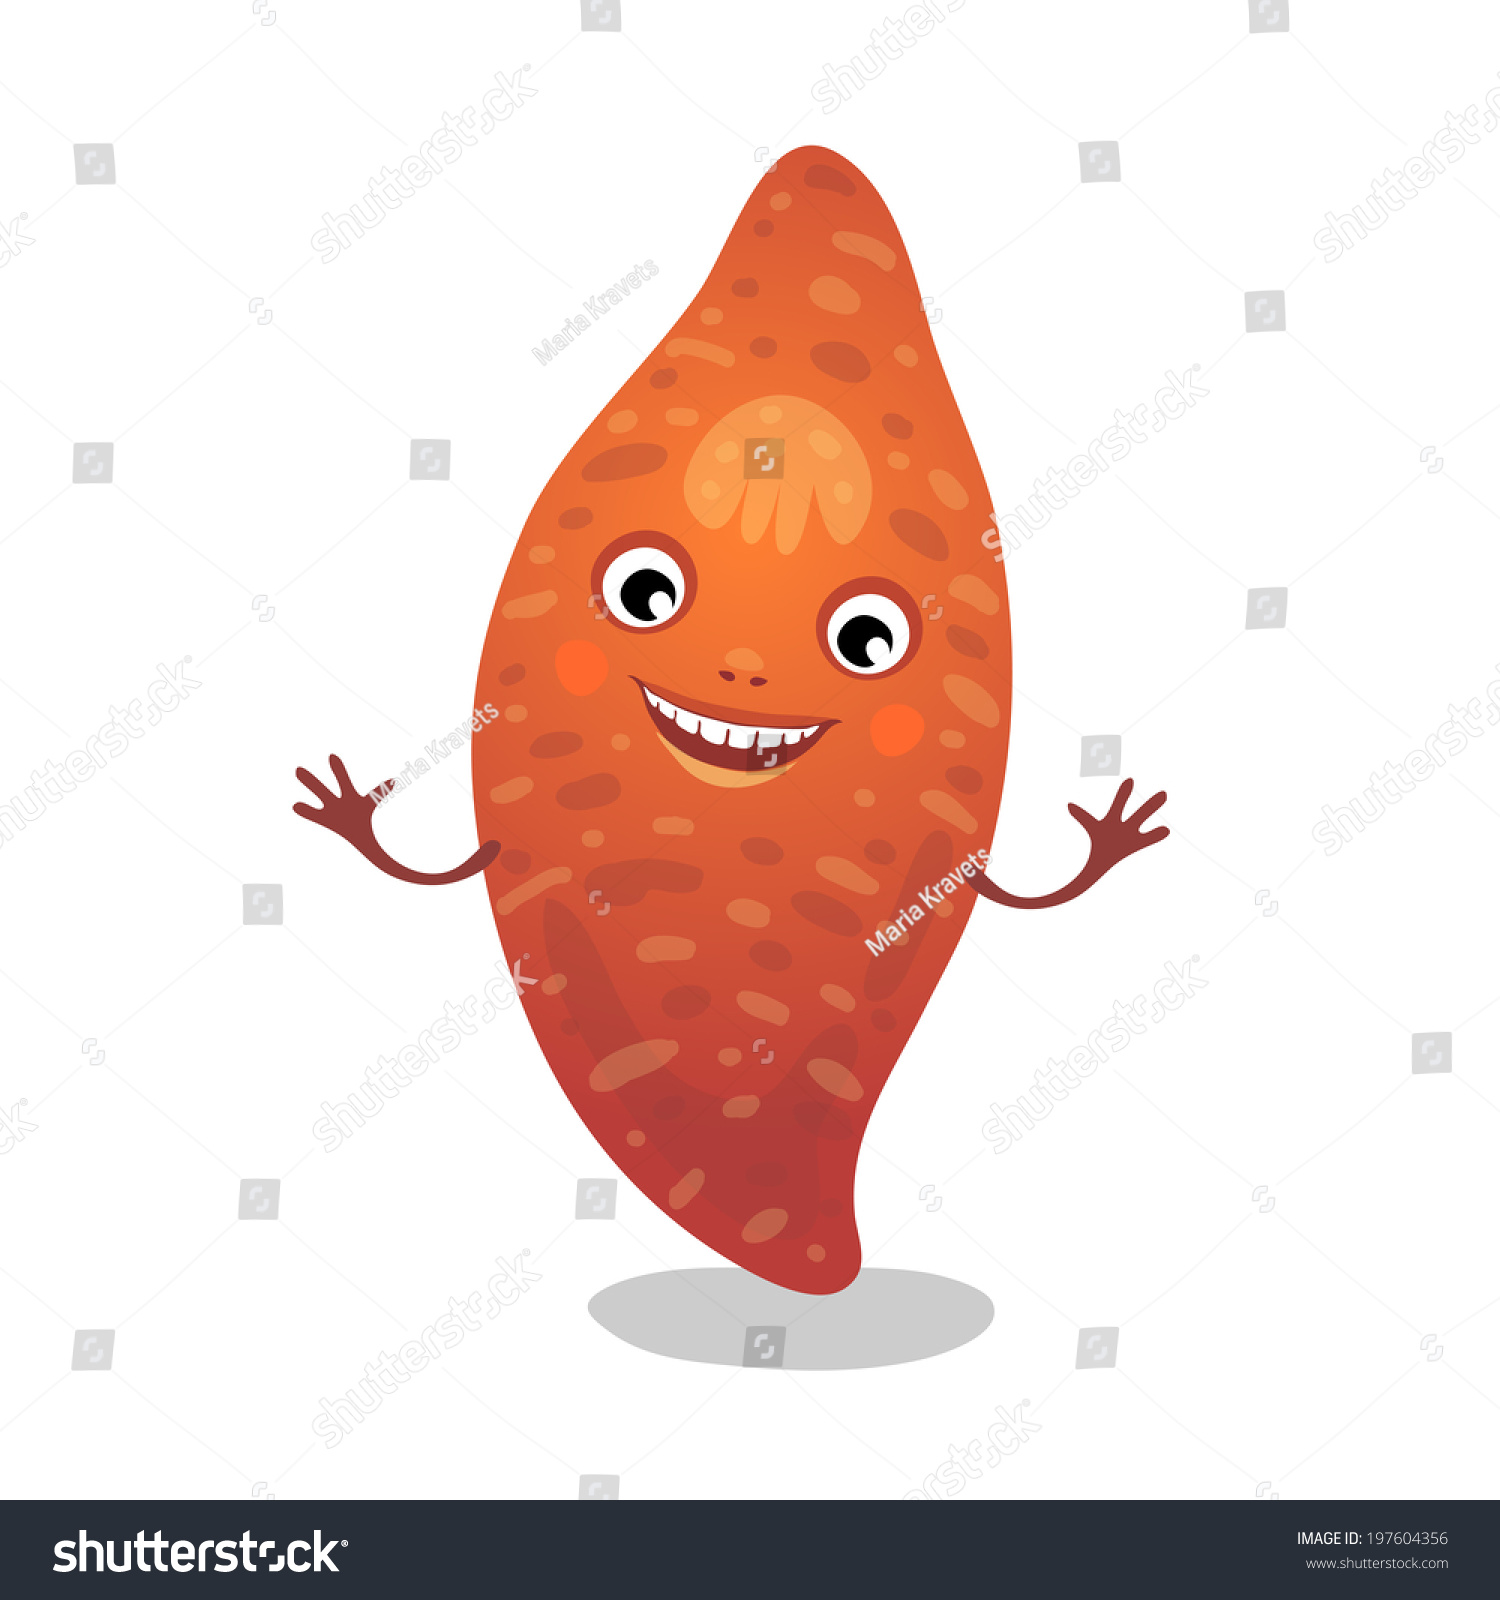 clipart of yam - photo #23